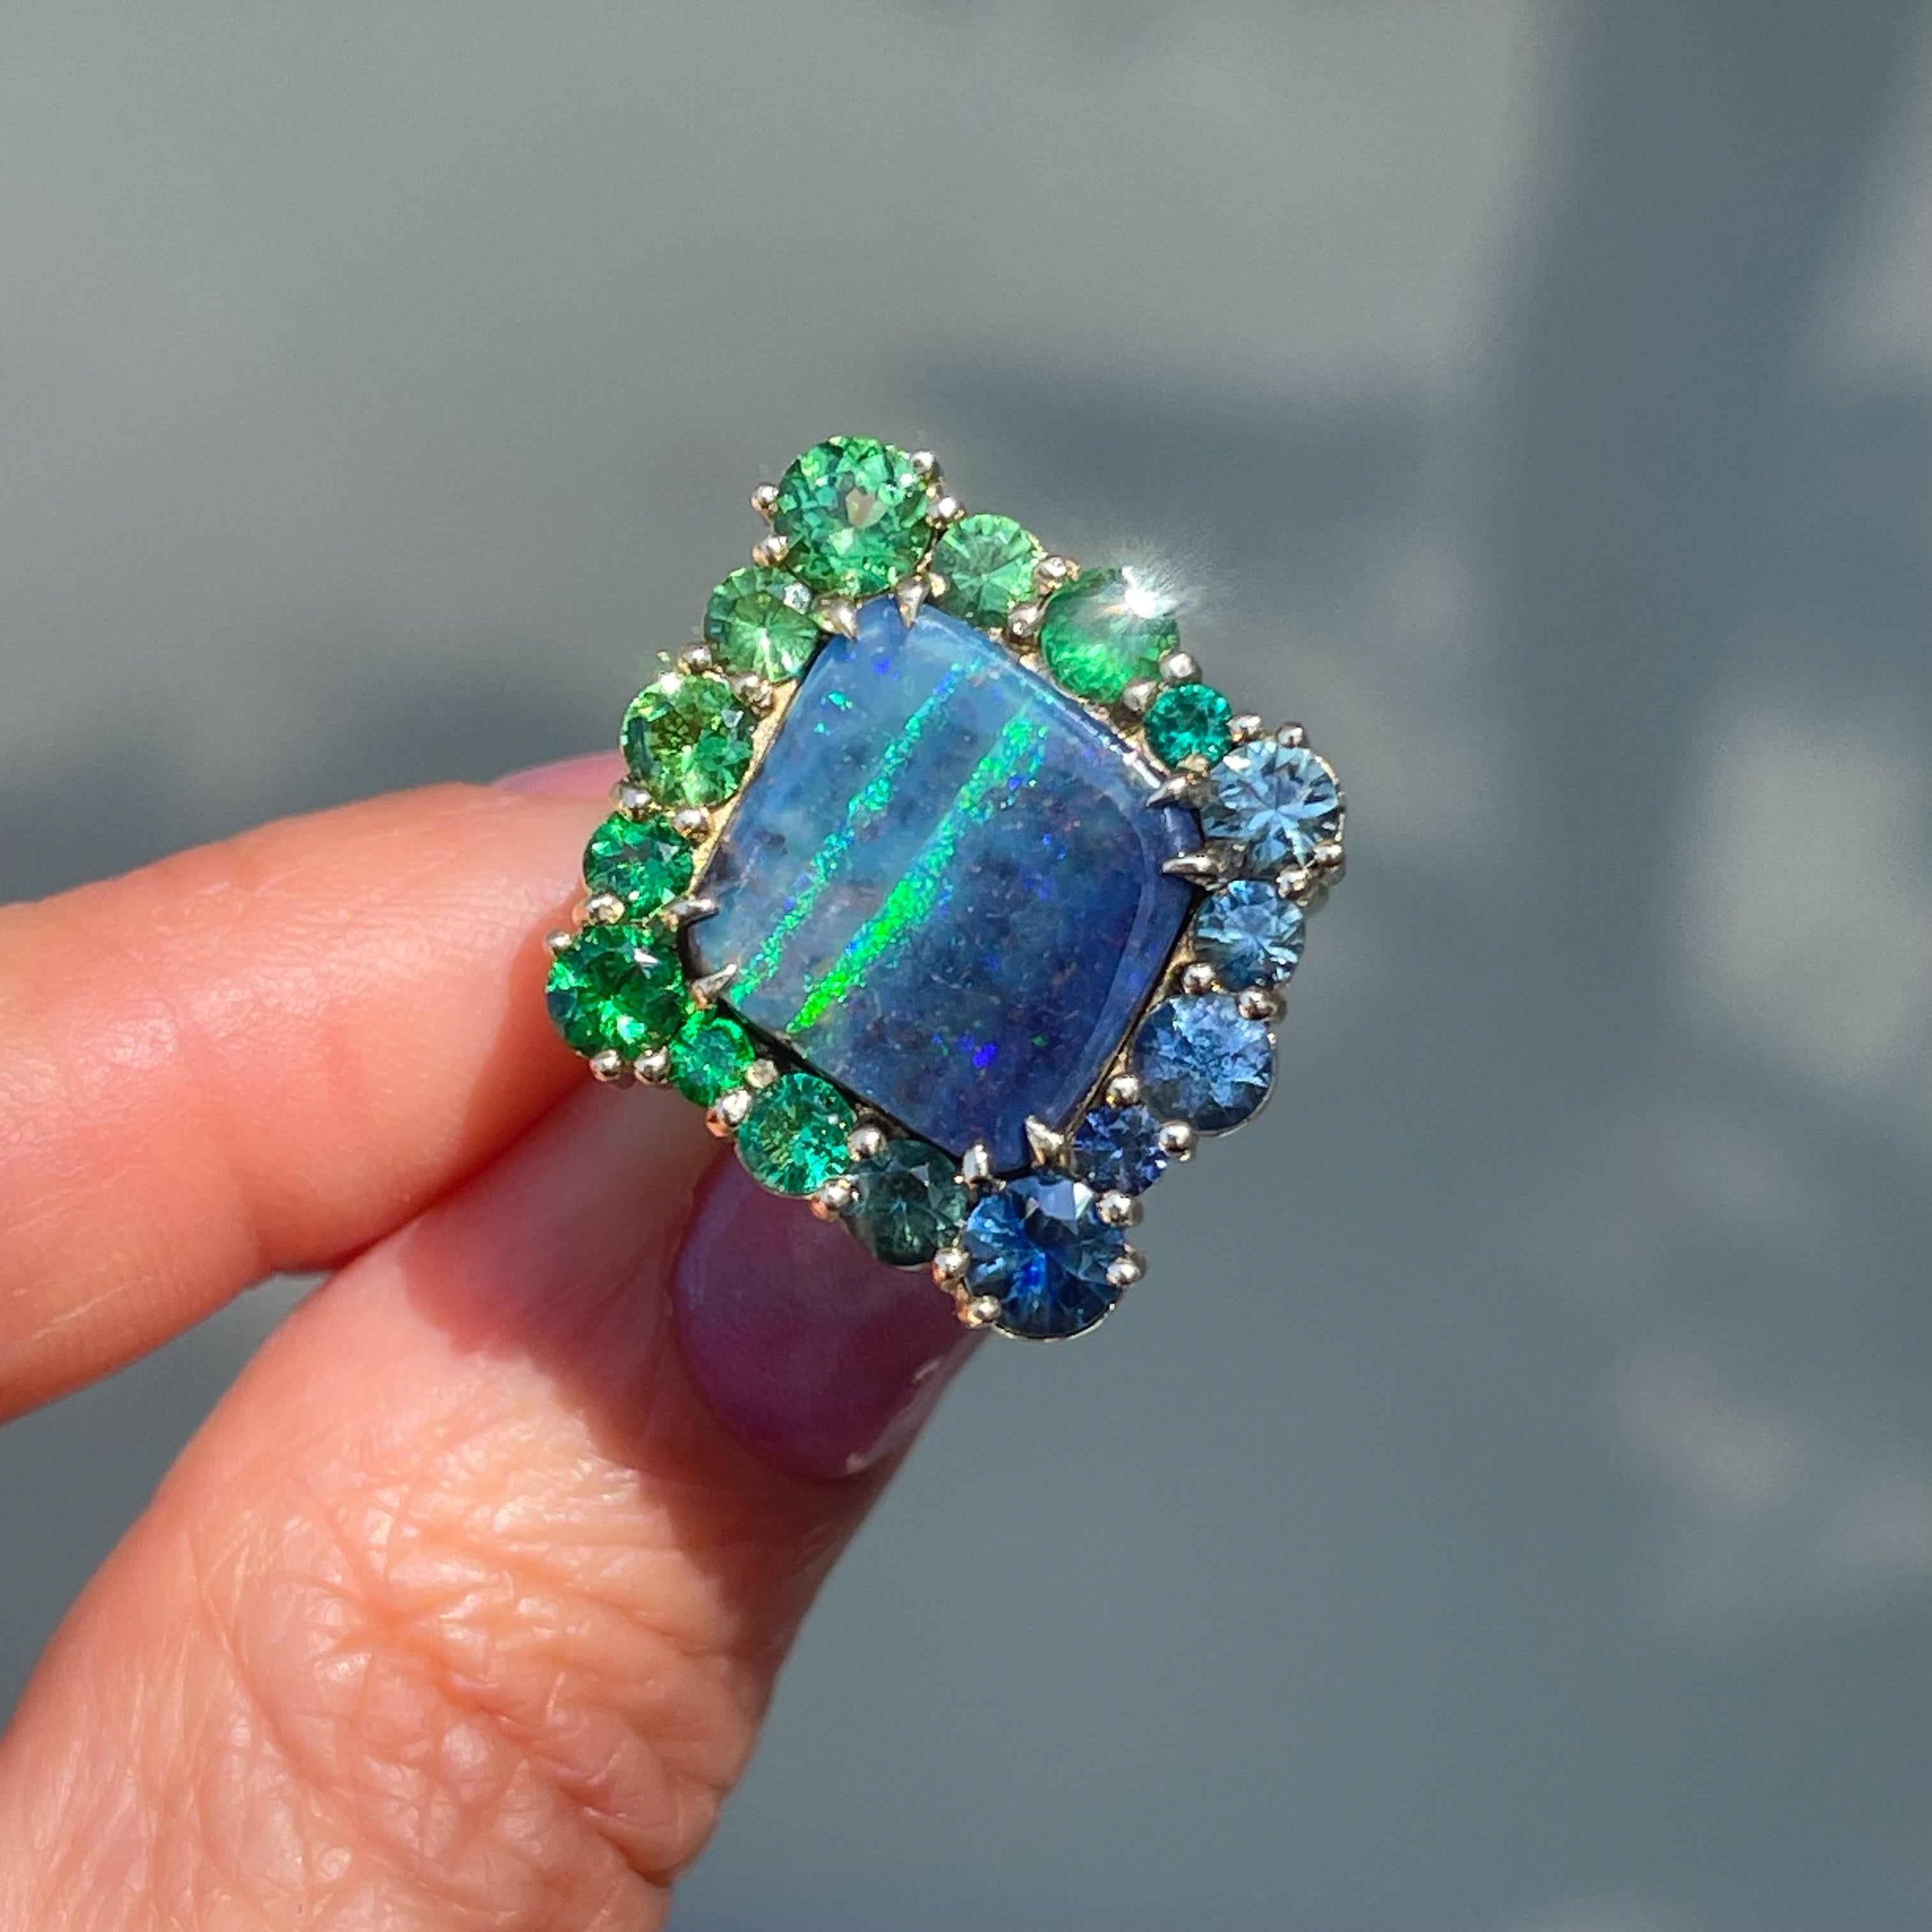 Verdant greens traverse the steely blue rhomboid that shapes this Australian Opal Ring. Framed by a halo of sapphires, emeralds and tsavorite garnets, the Boulder Opal sees its palette reflected in the surrounding stones. Held in place by golden